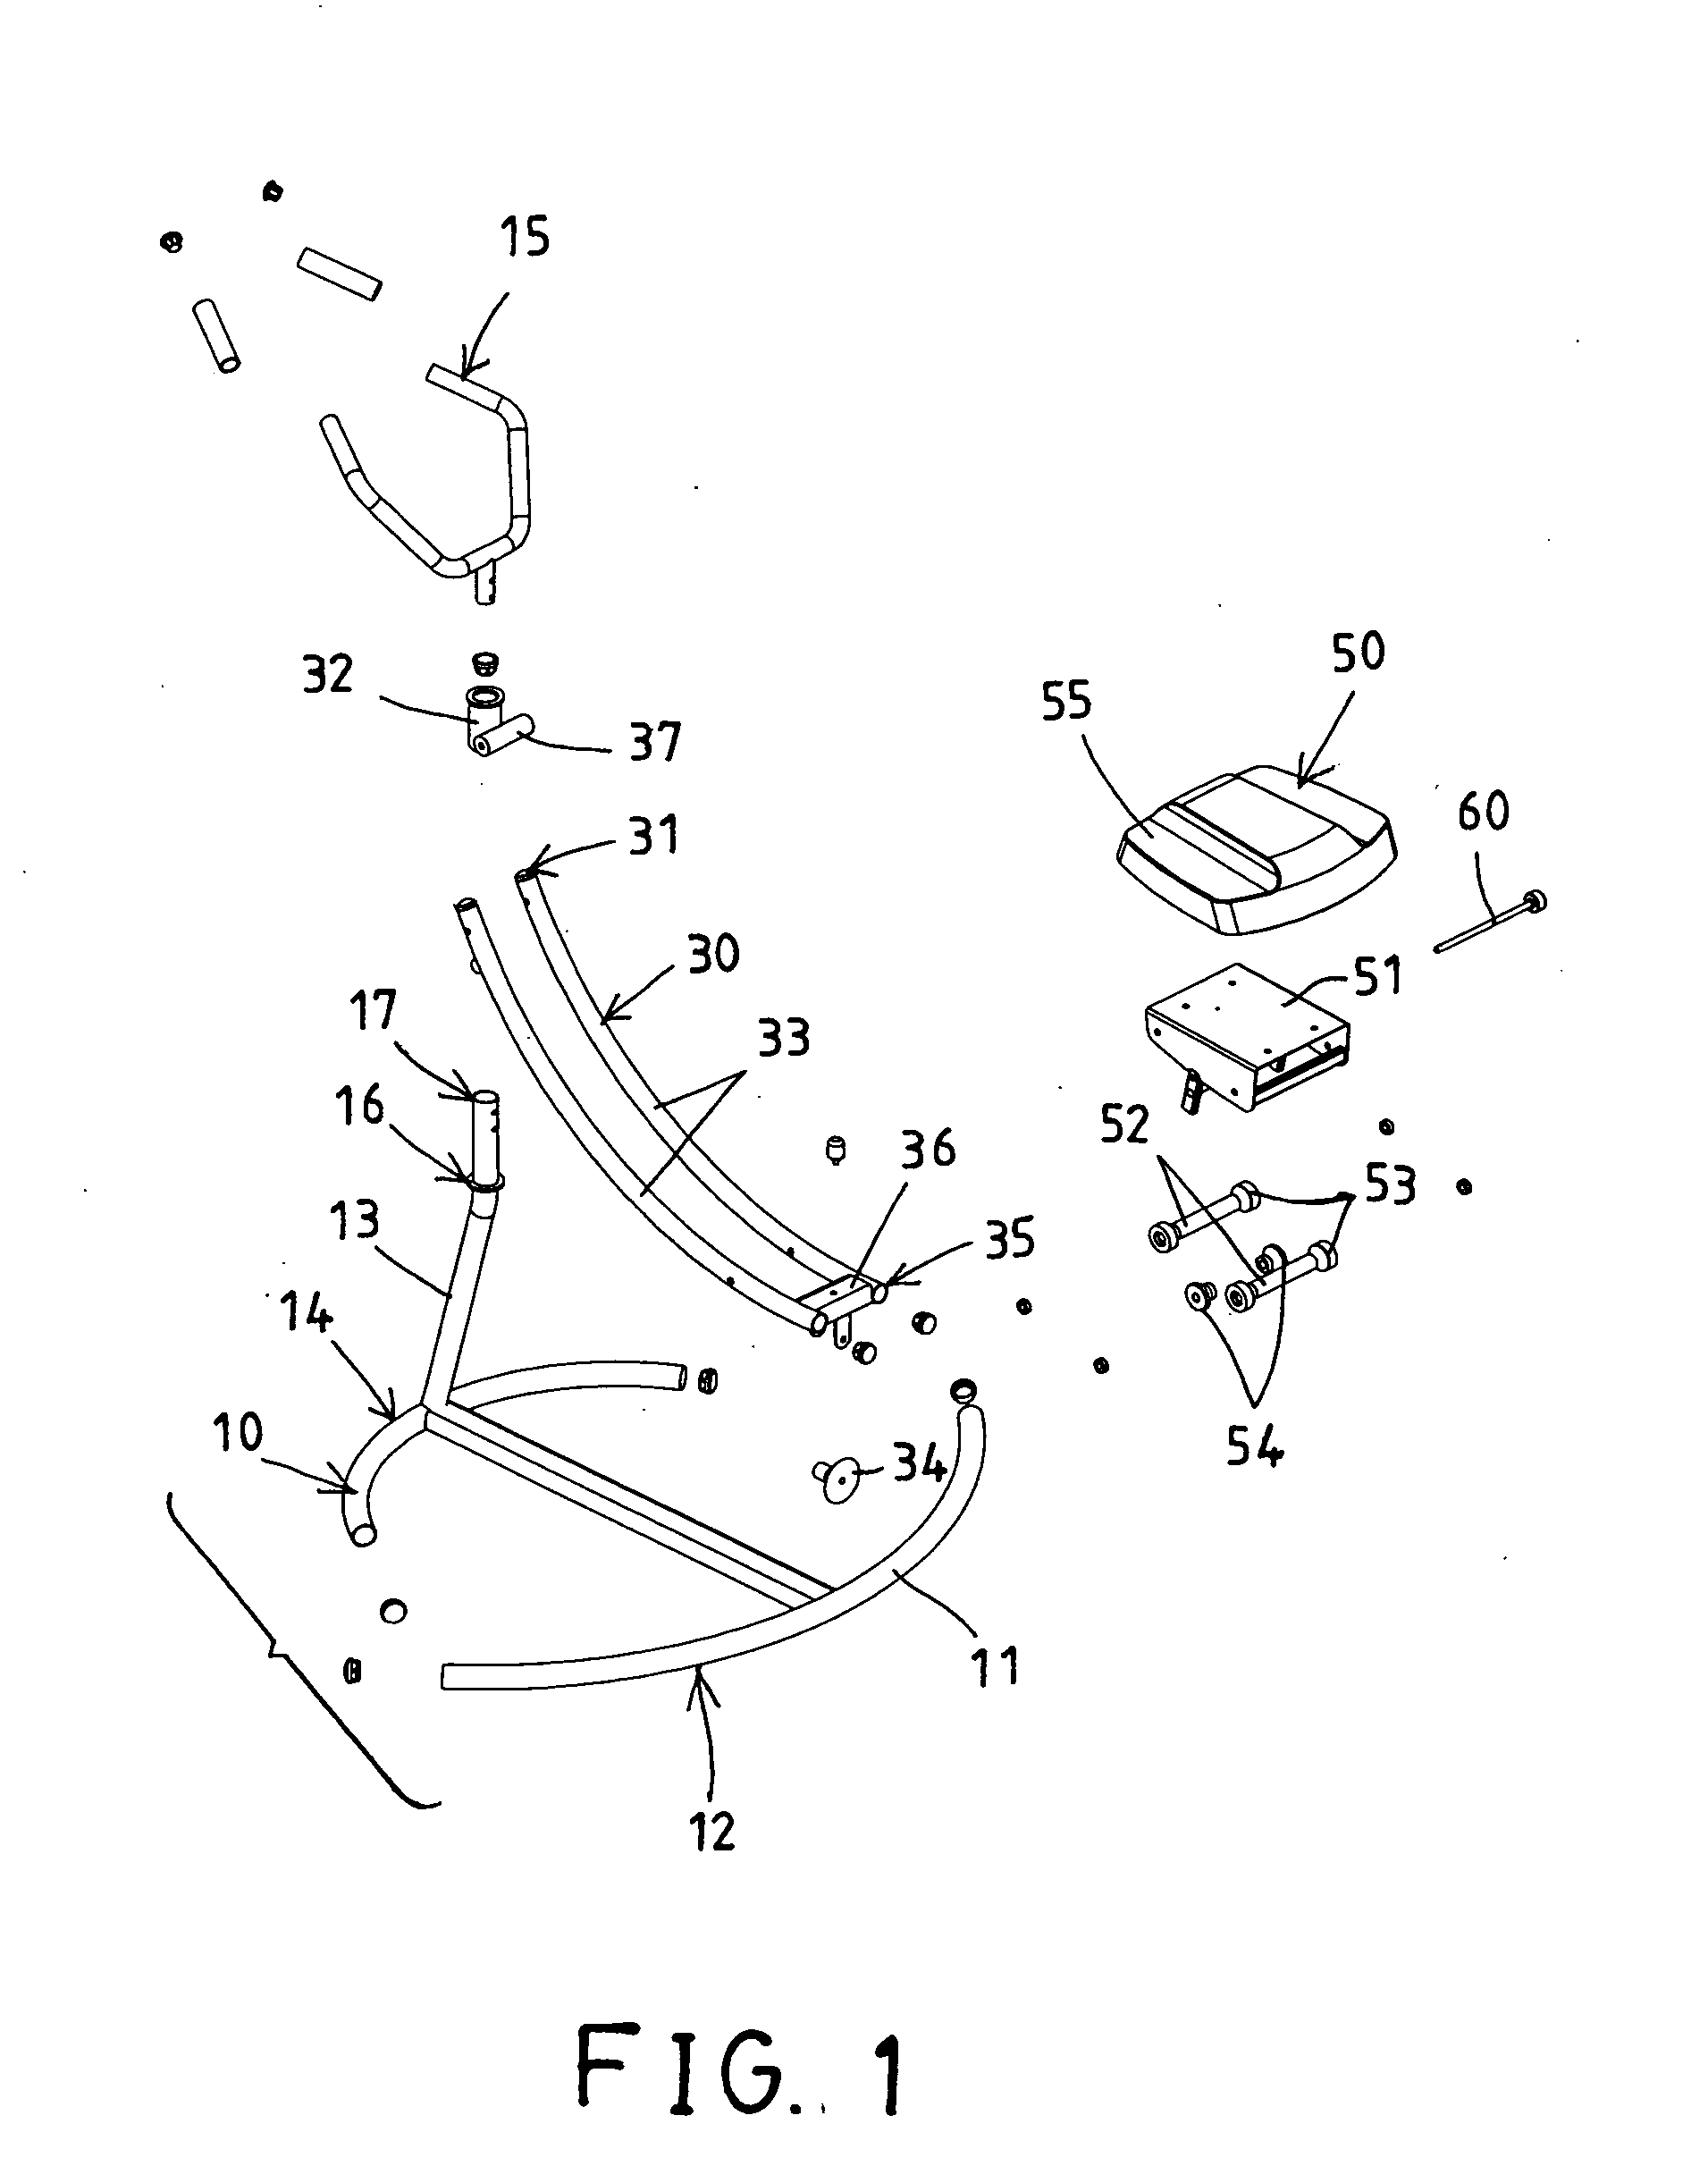 Swinging and climbing exercise apparatus